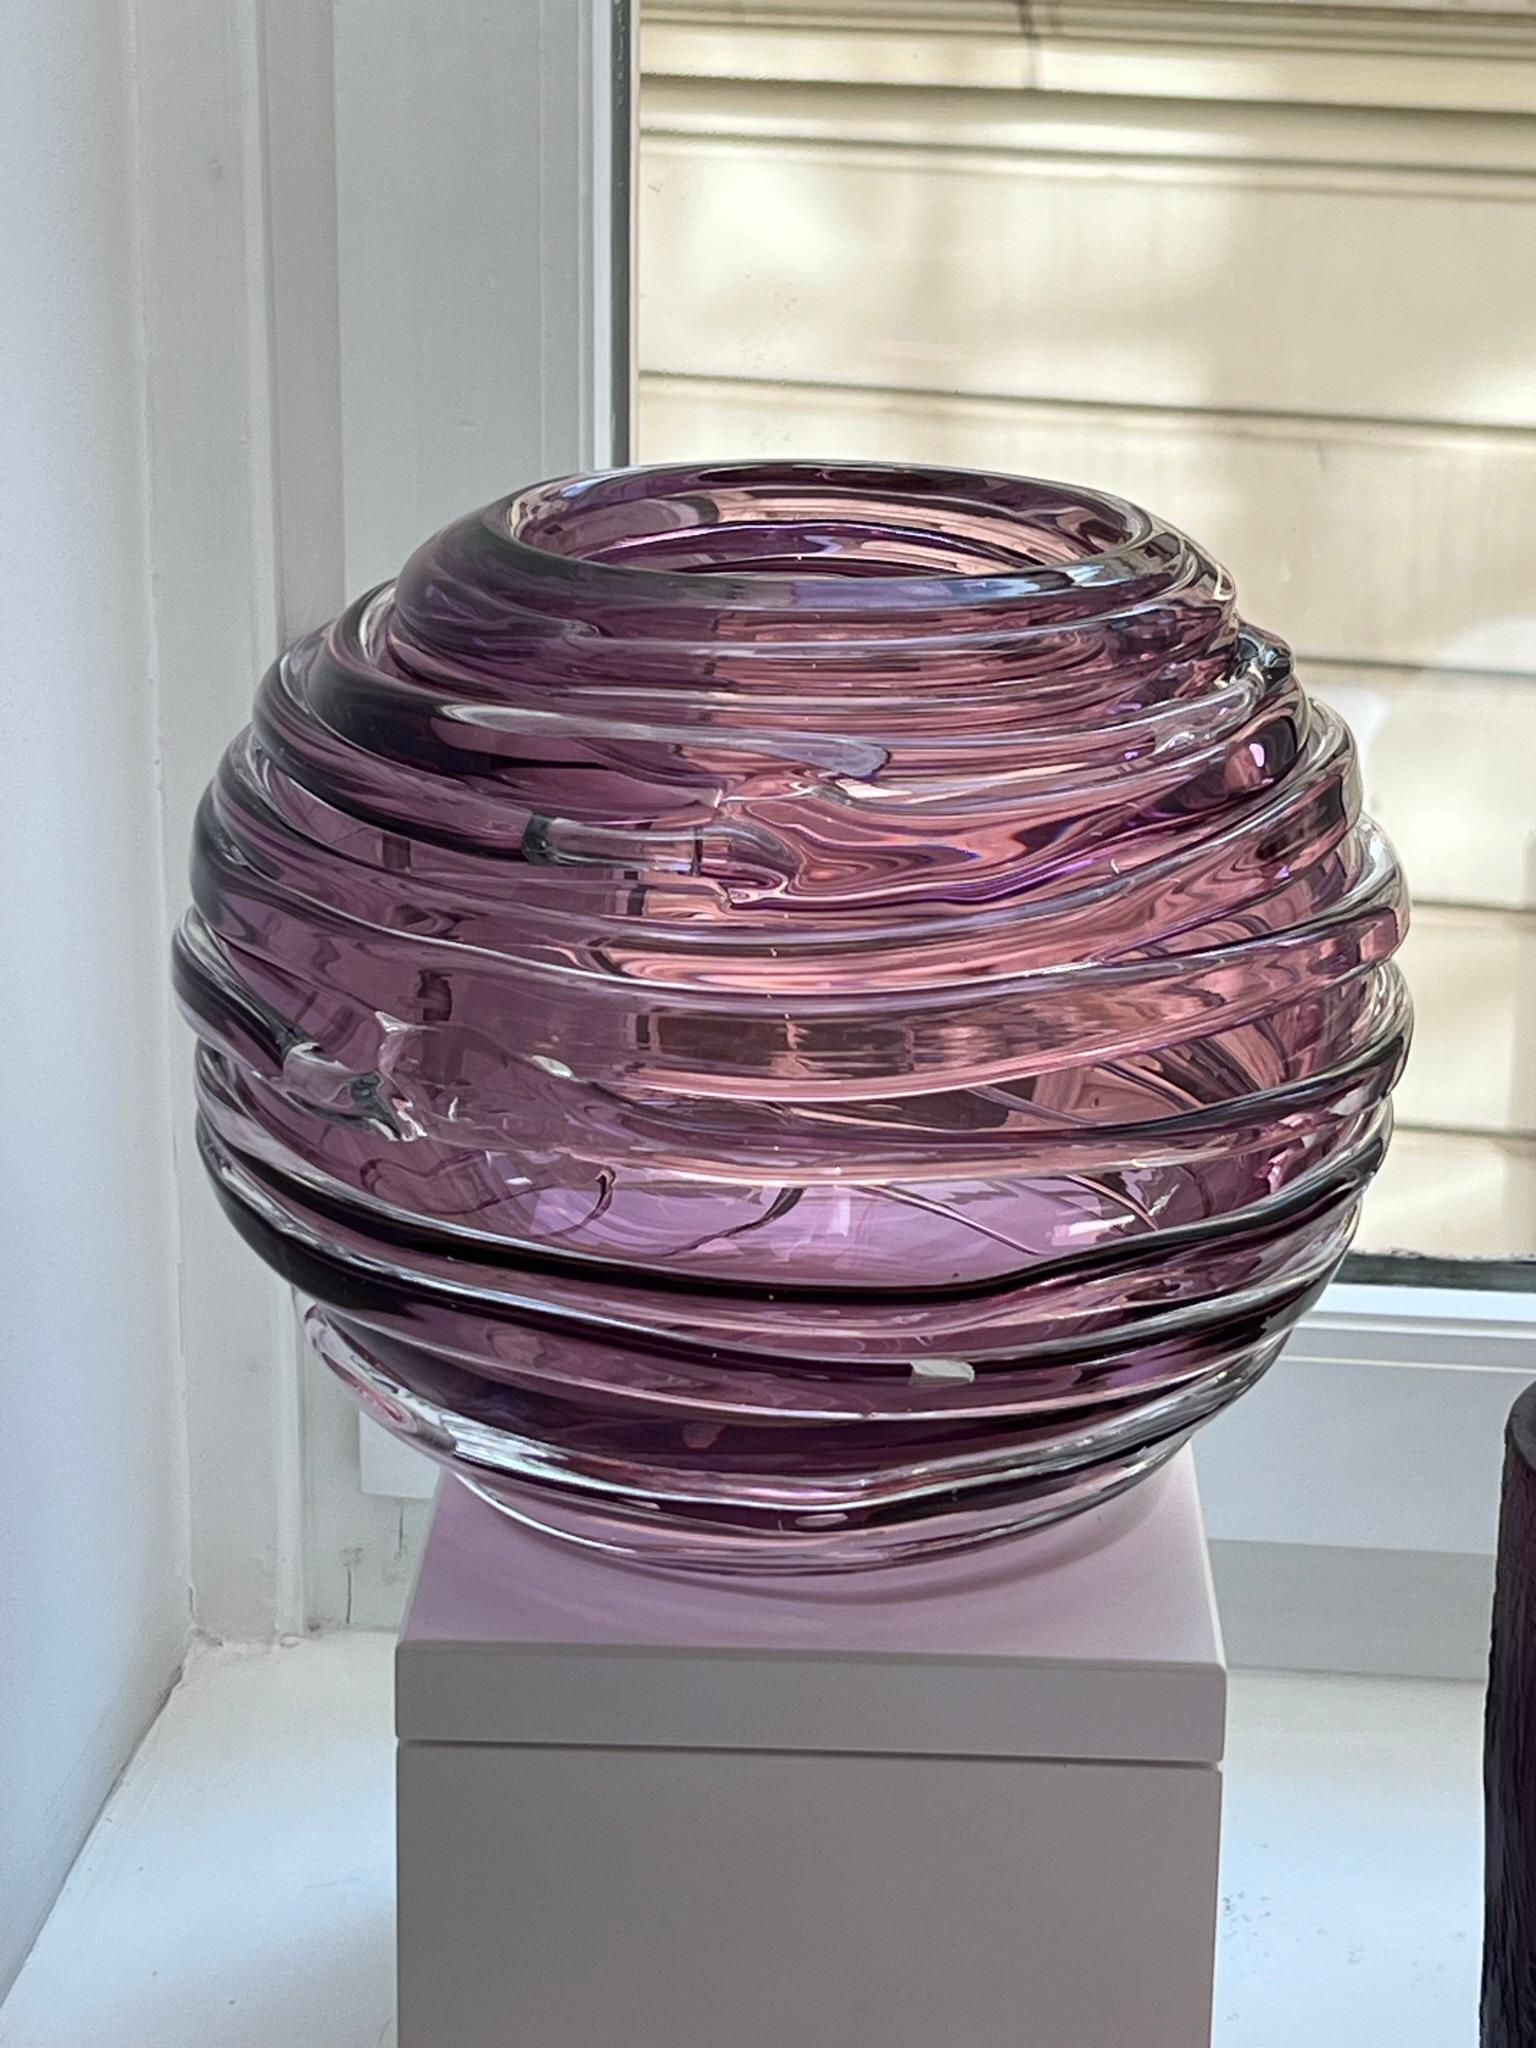 This mouth-blown glass vase is completely hand-crafted in a beautiful amethyst color with clear ribbed details. Measuring 21 cm (8.25 inches) in diameter, it is the perfect size for everyday flowers and looks equally stunning as a stand alone